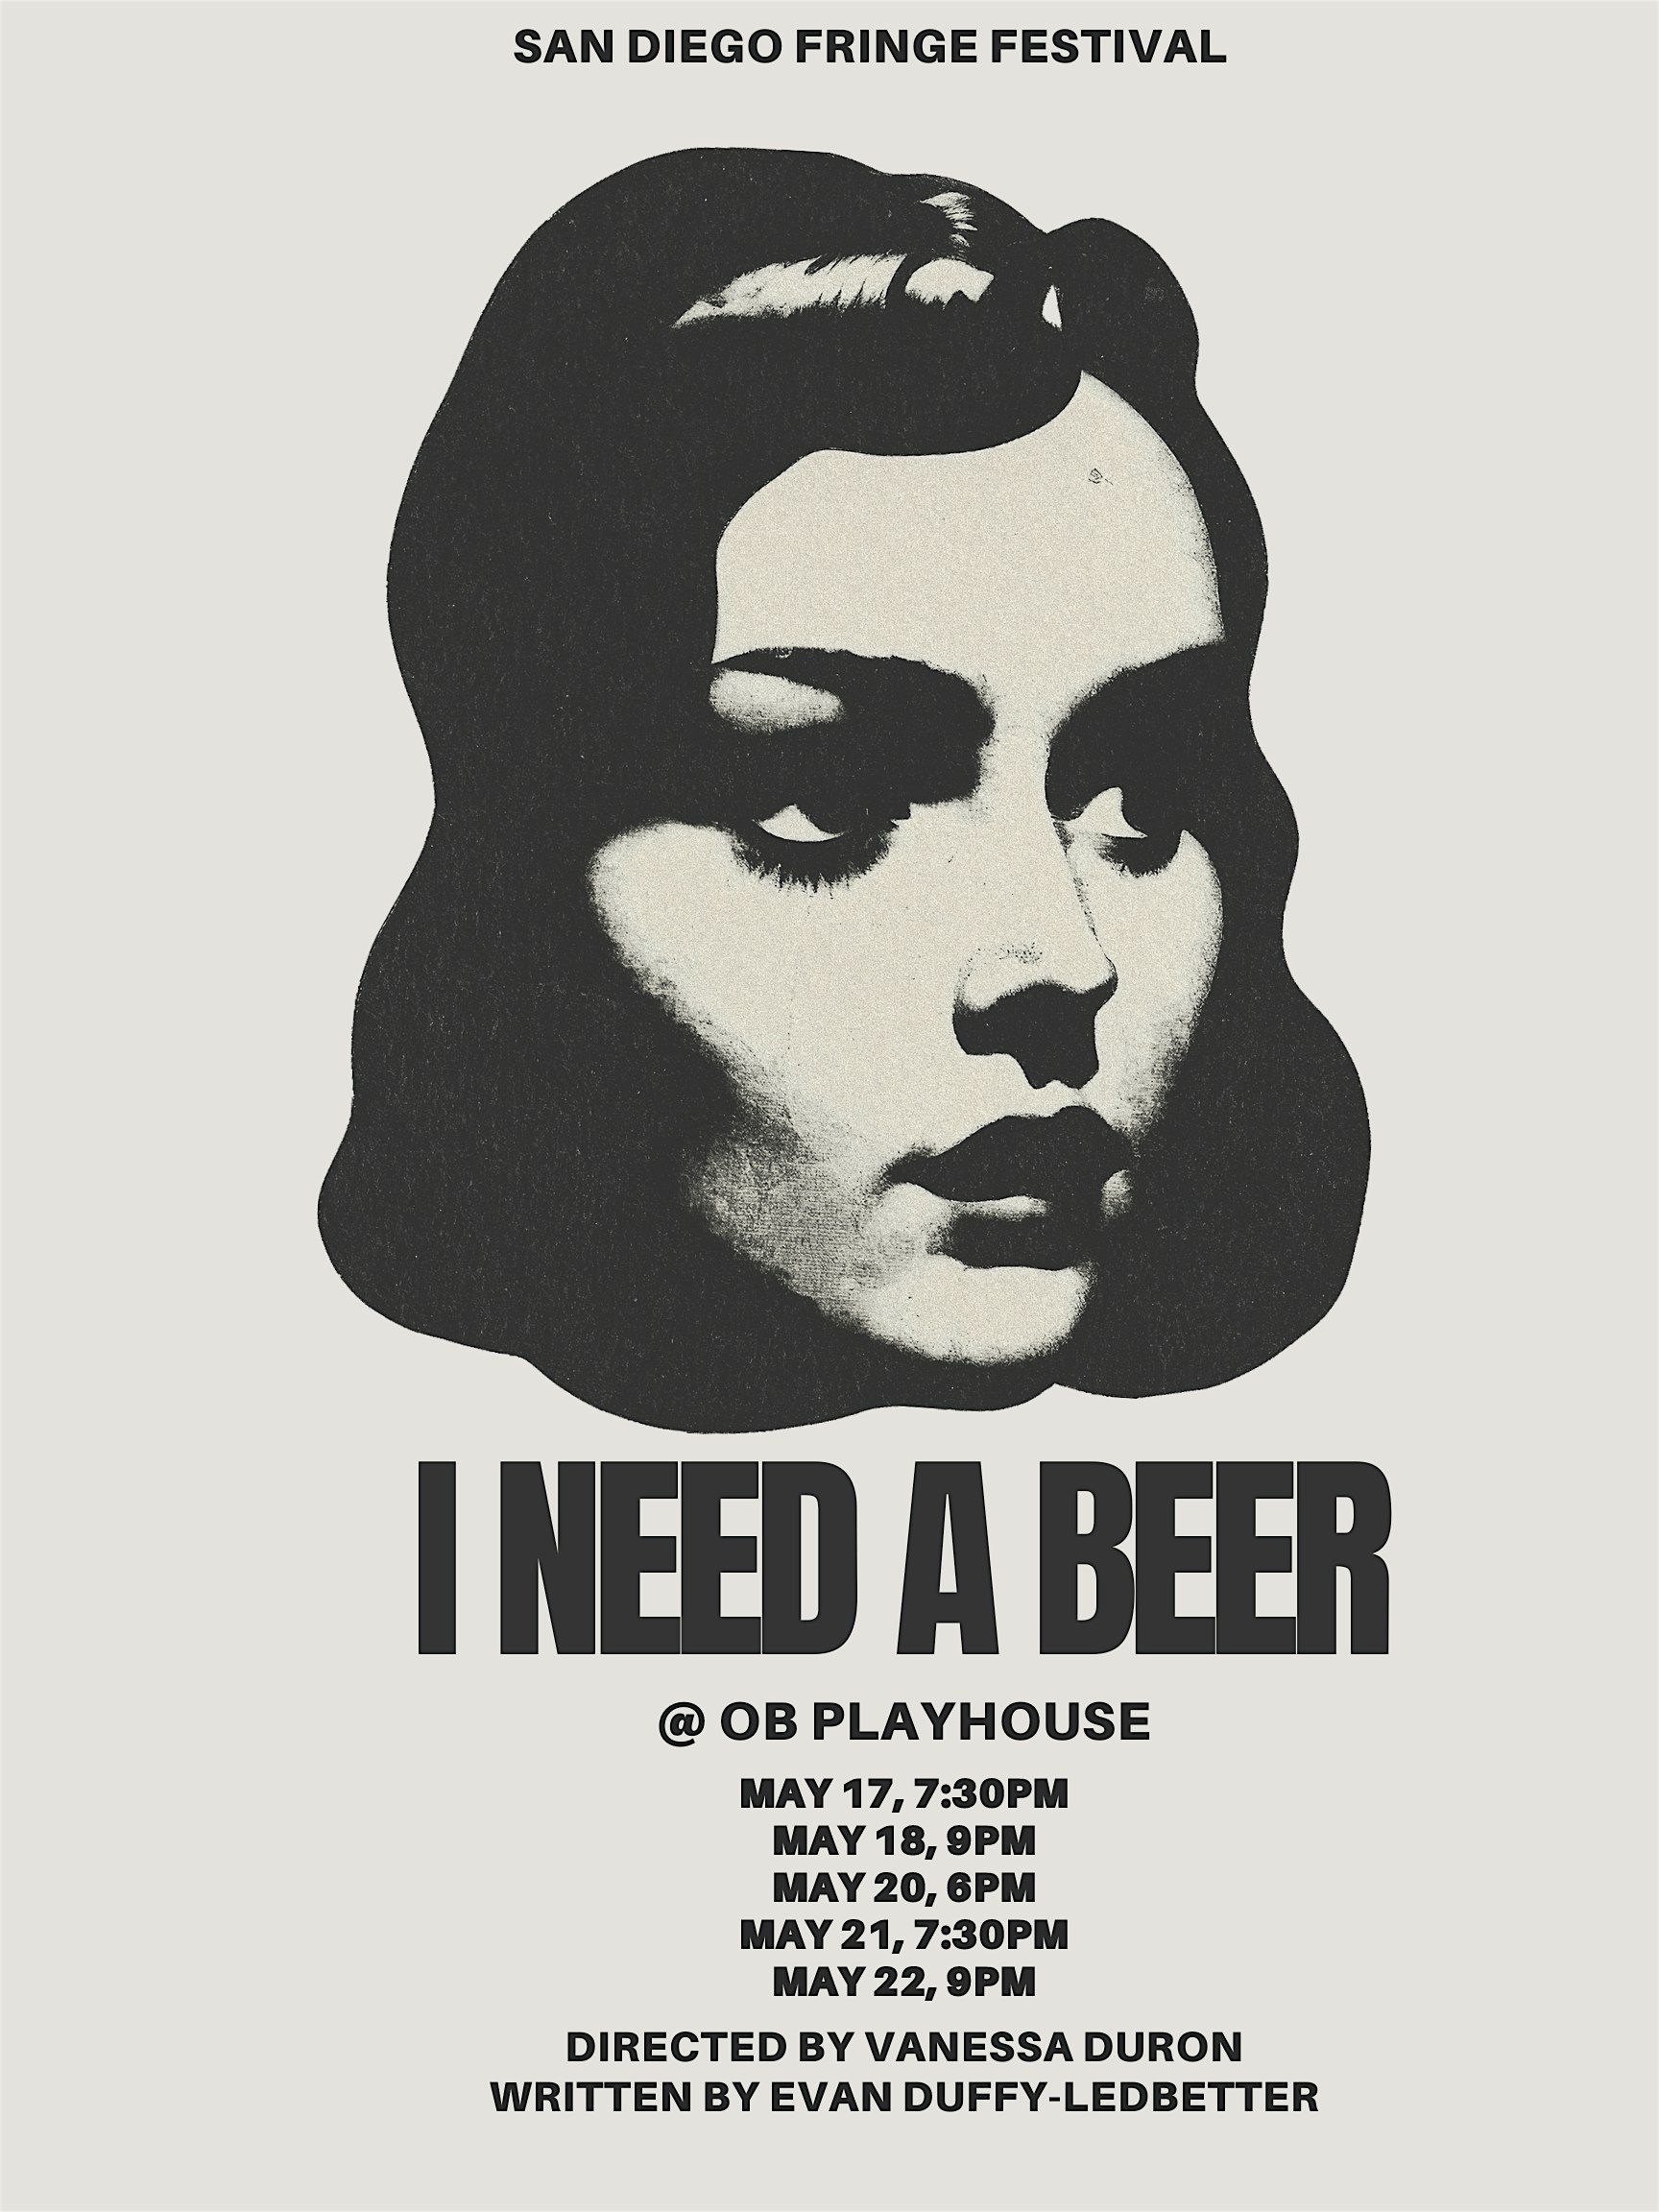 I NEED A BEER (SD Fringe Festival Play)